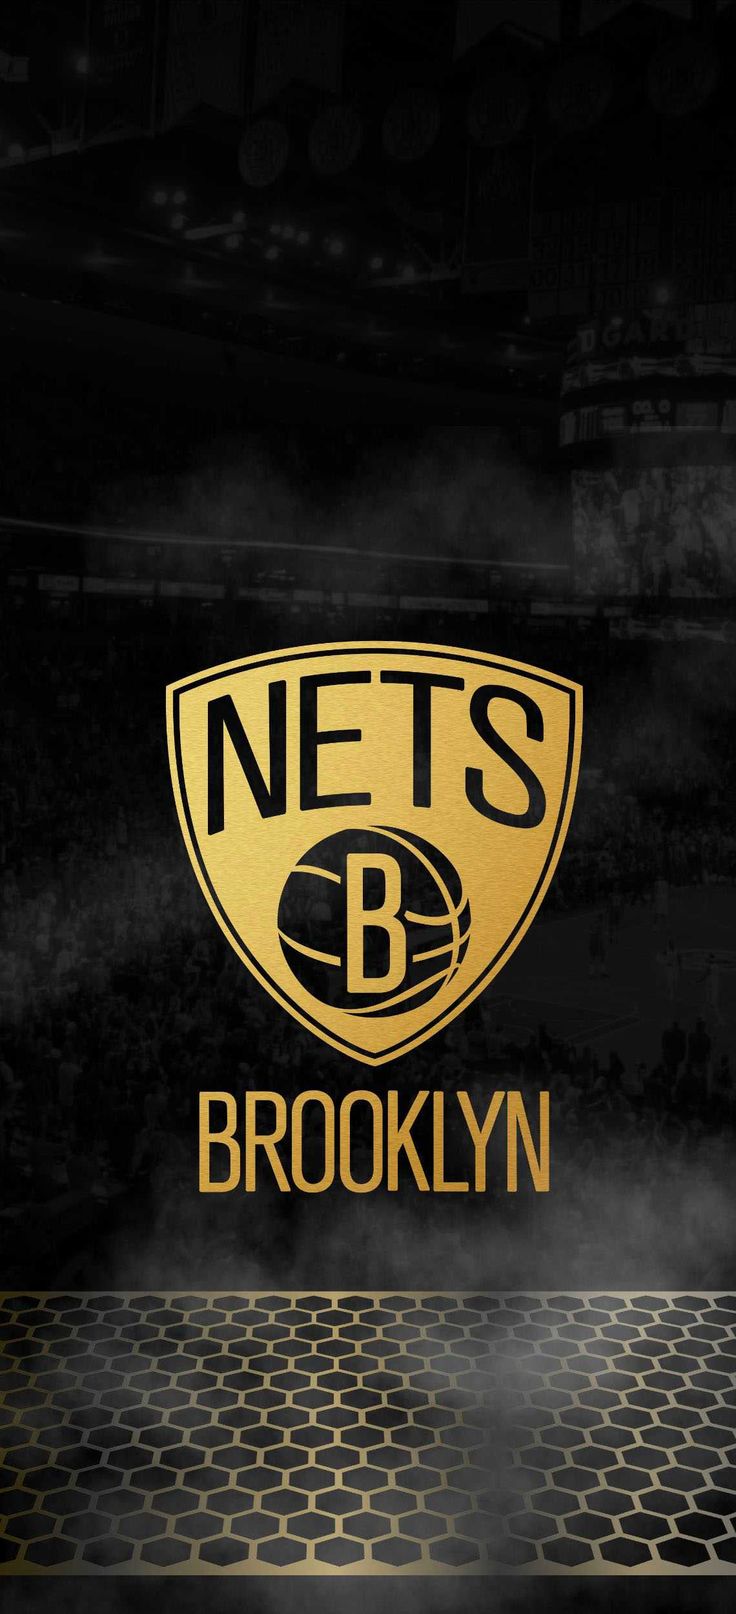 Brooklyn nets wallpaper browse brooklyn nets wallpaper with collections of android basketball broâ in brooklyn nets basketball wallpaper brooklyn nets basketball